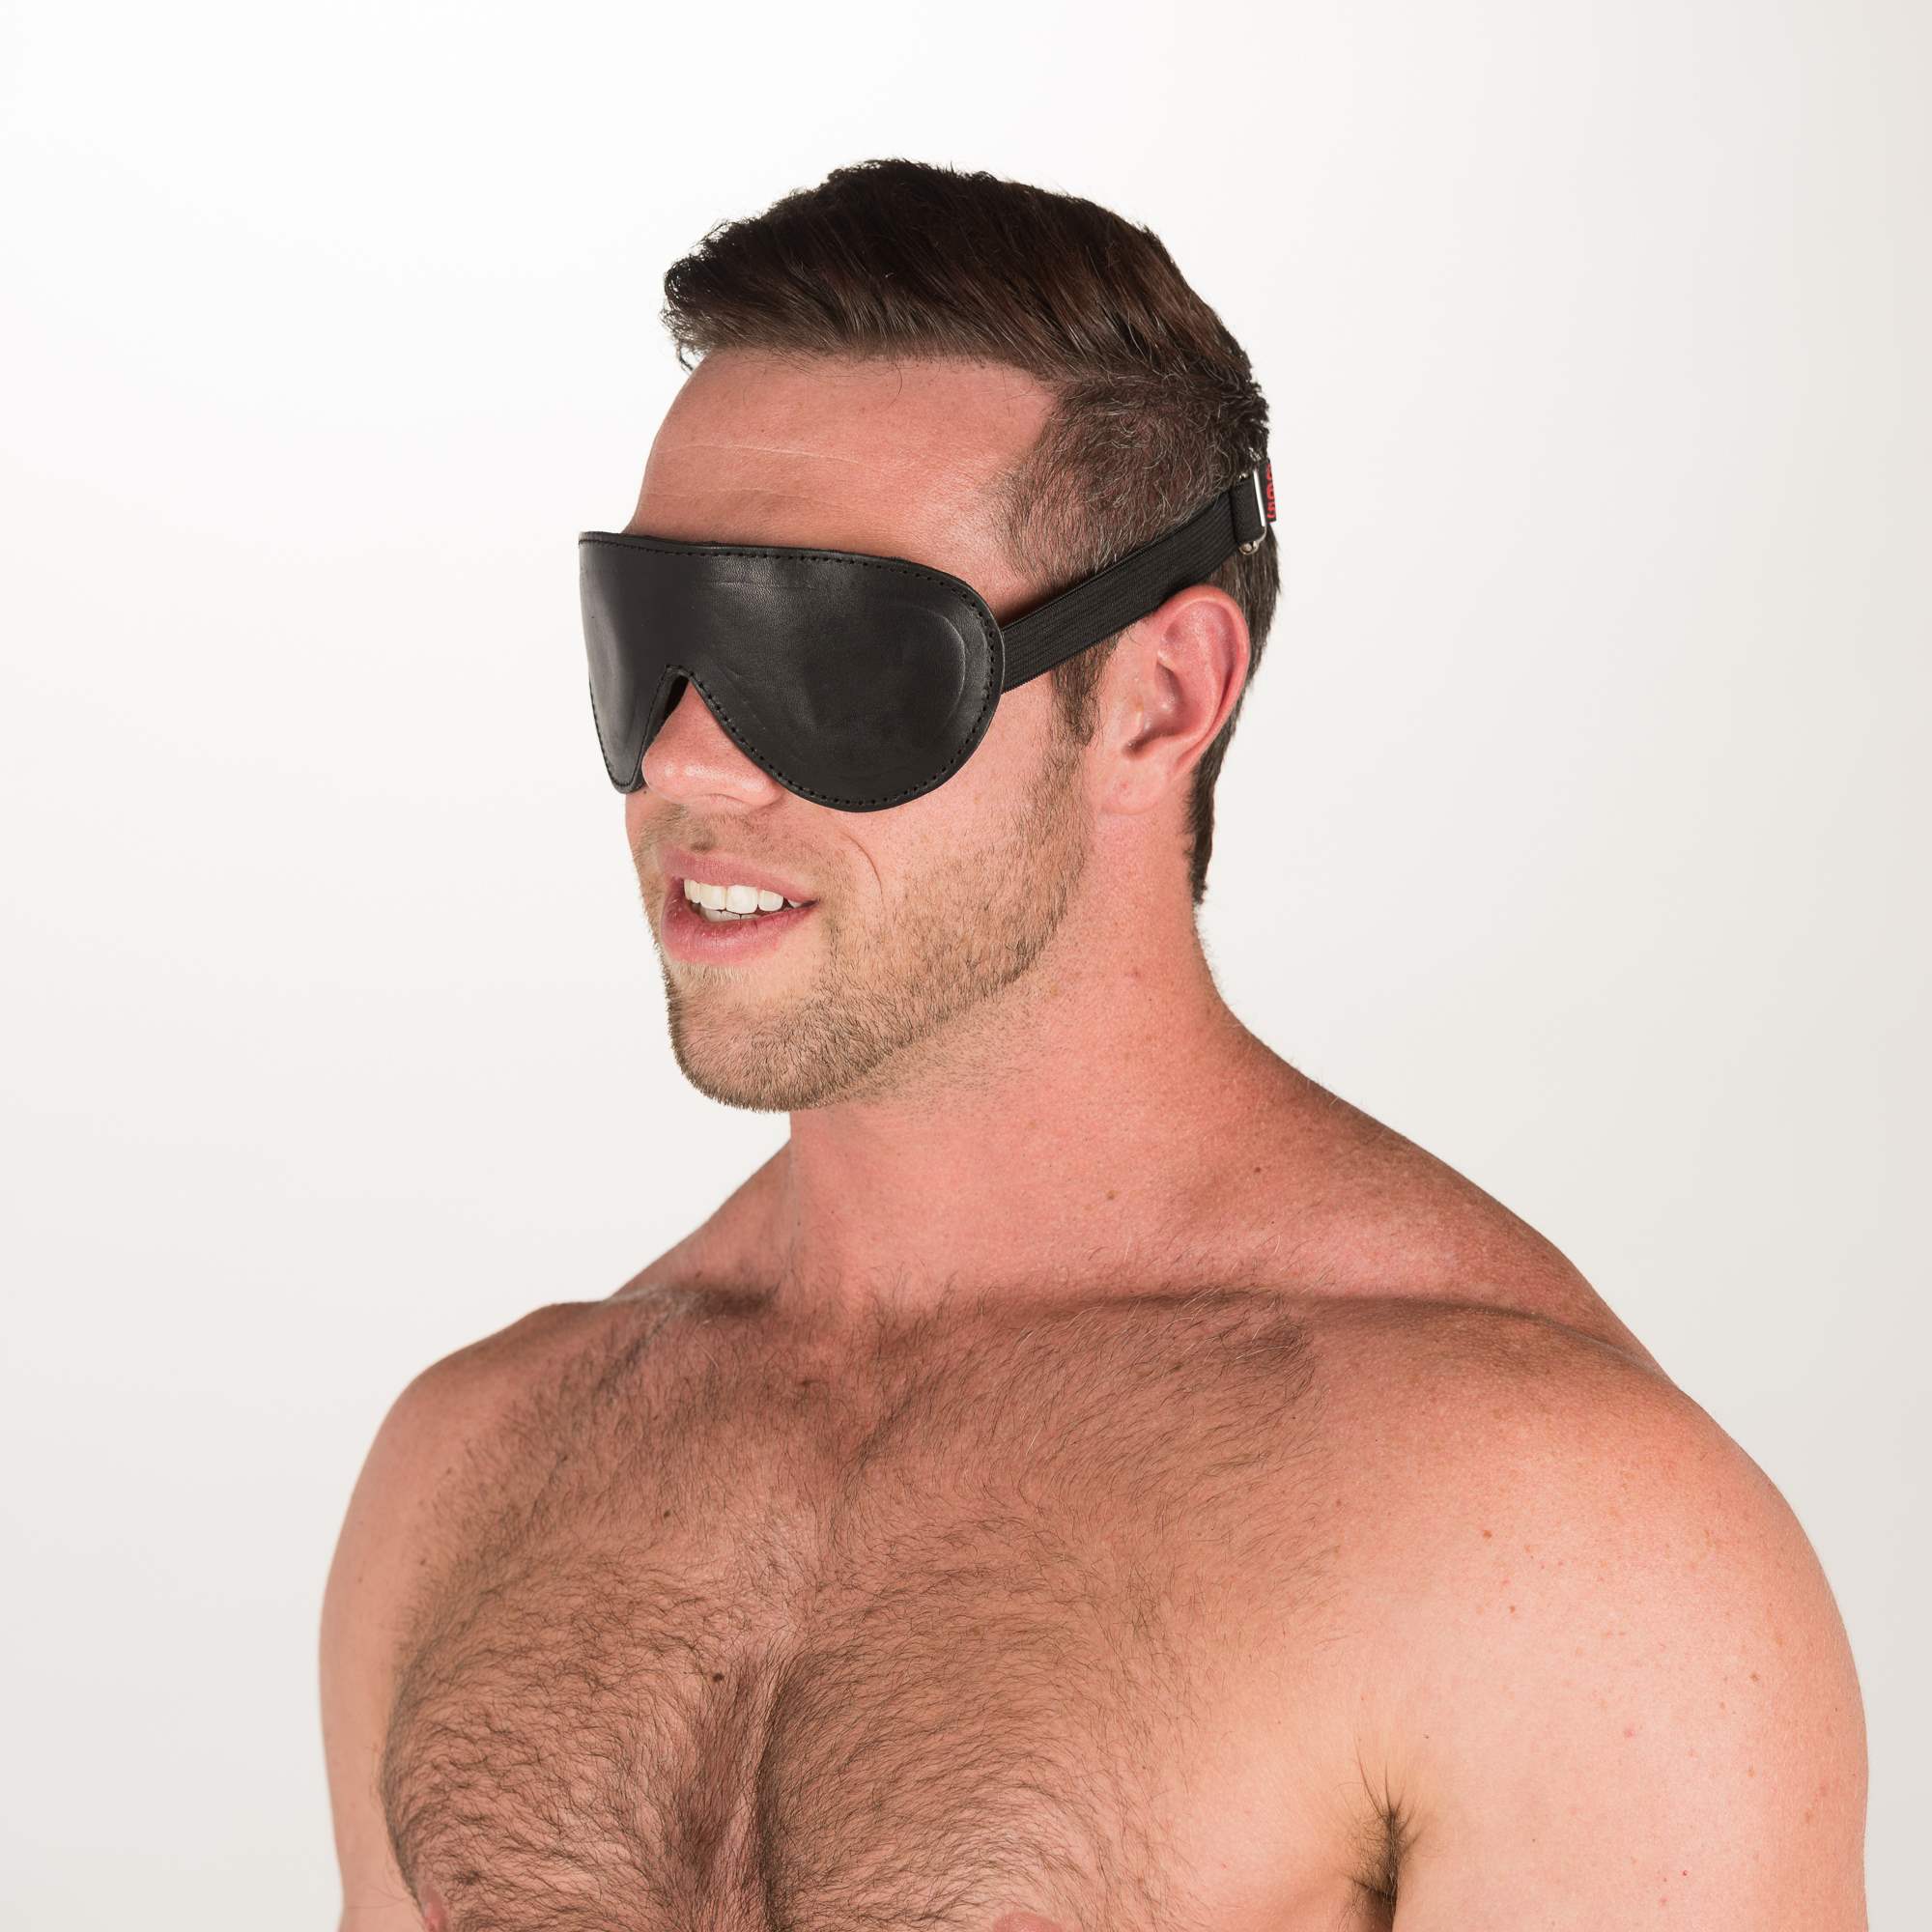 Classic Leather Blindfold, Padded Fabric Lining - The Tool Shed: An Erotic  Boutique